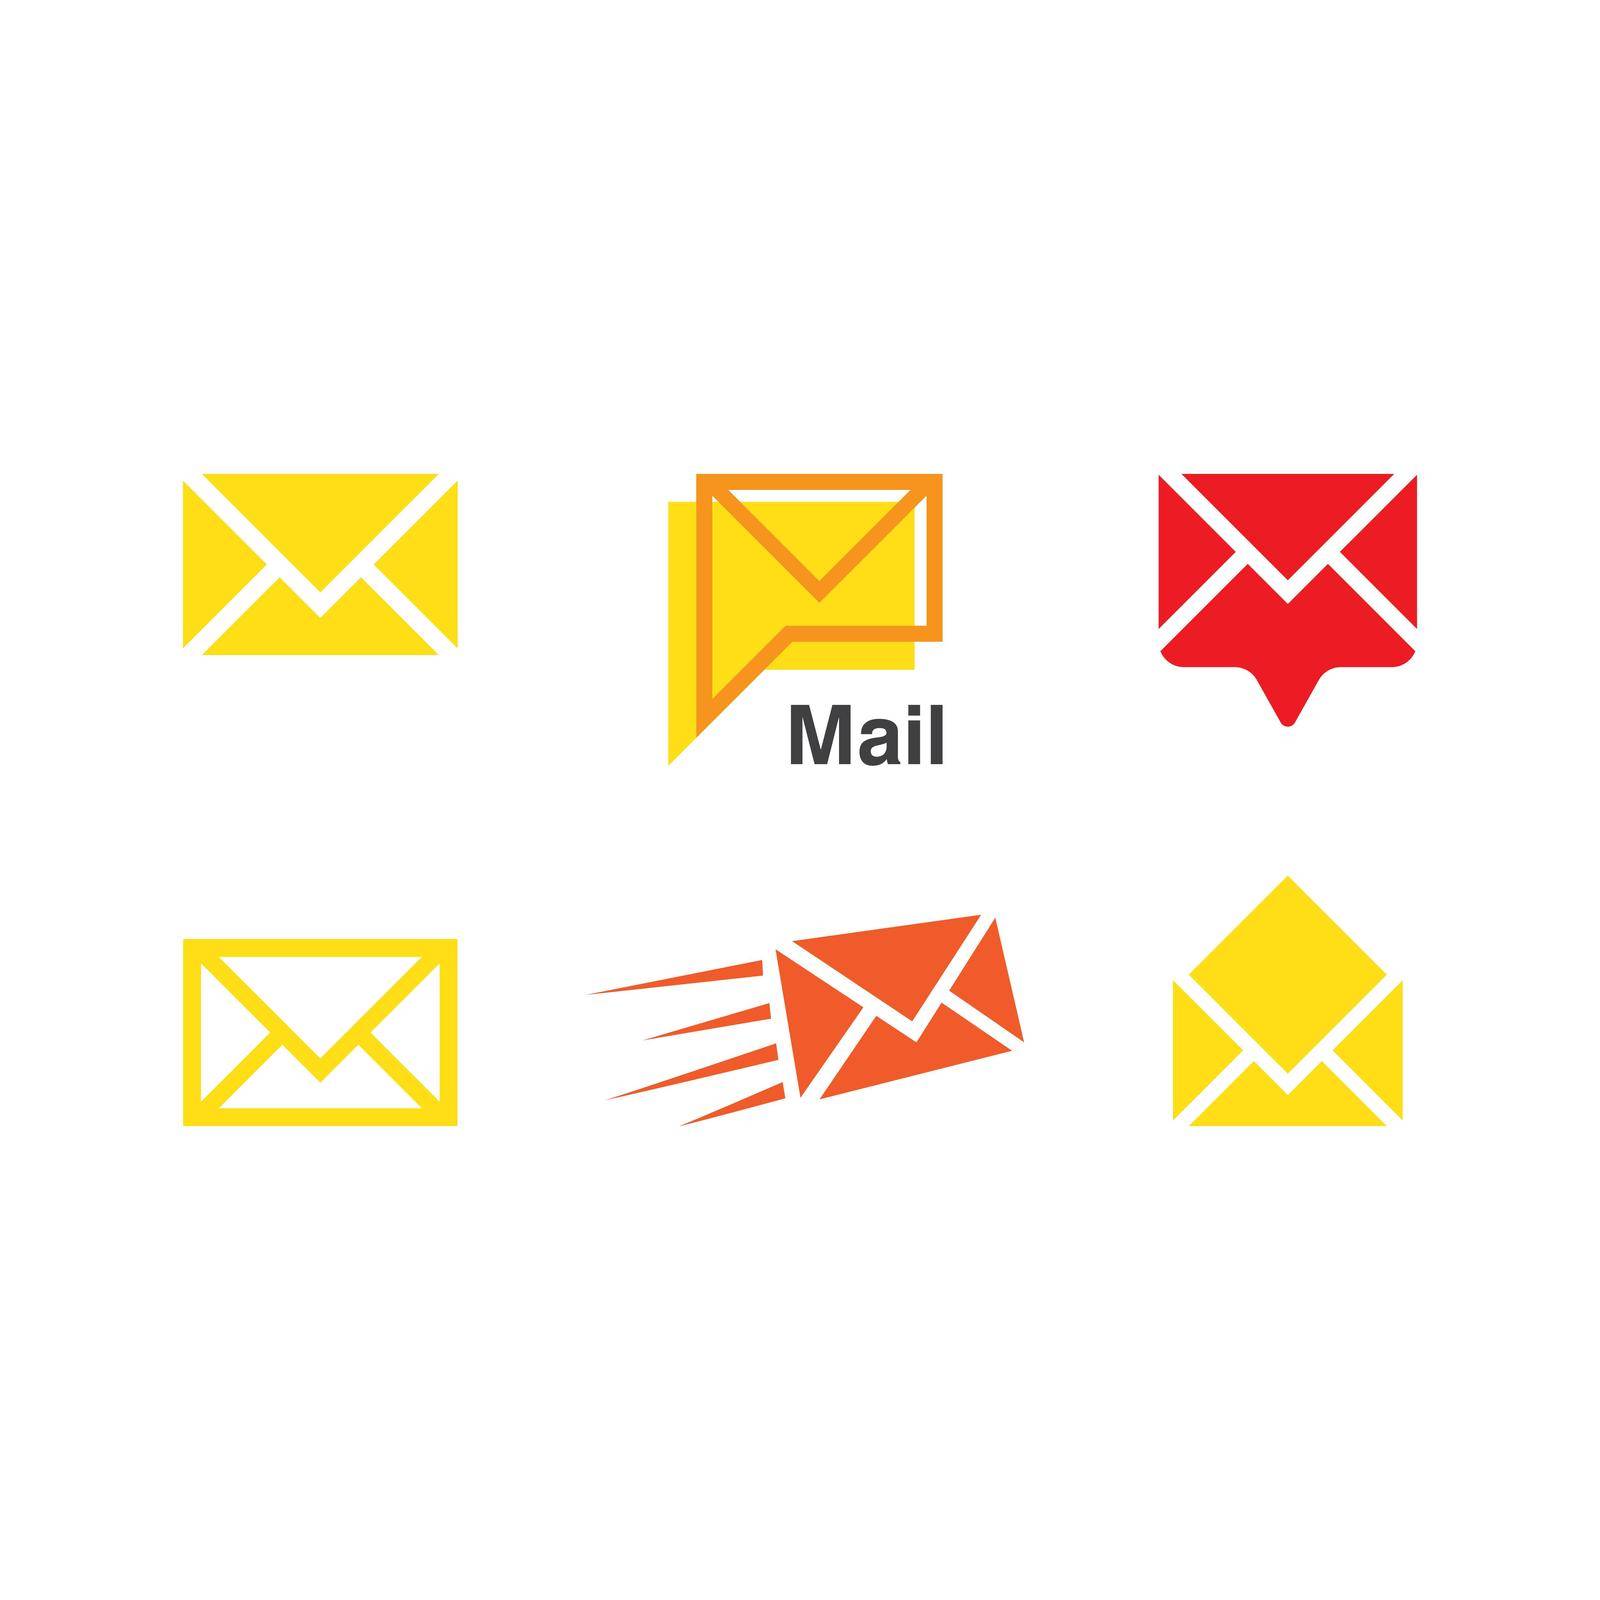 Mail by awk